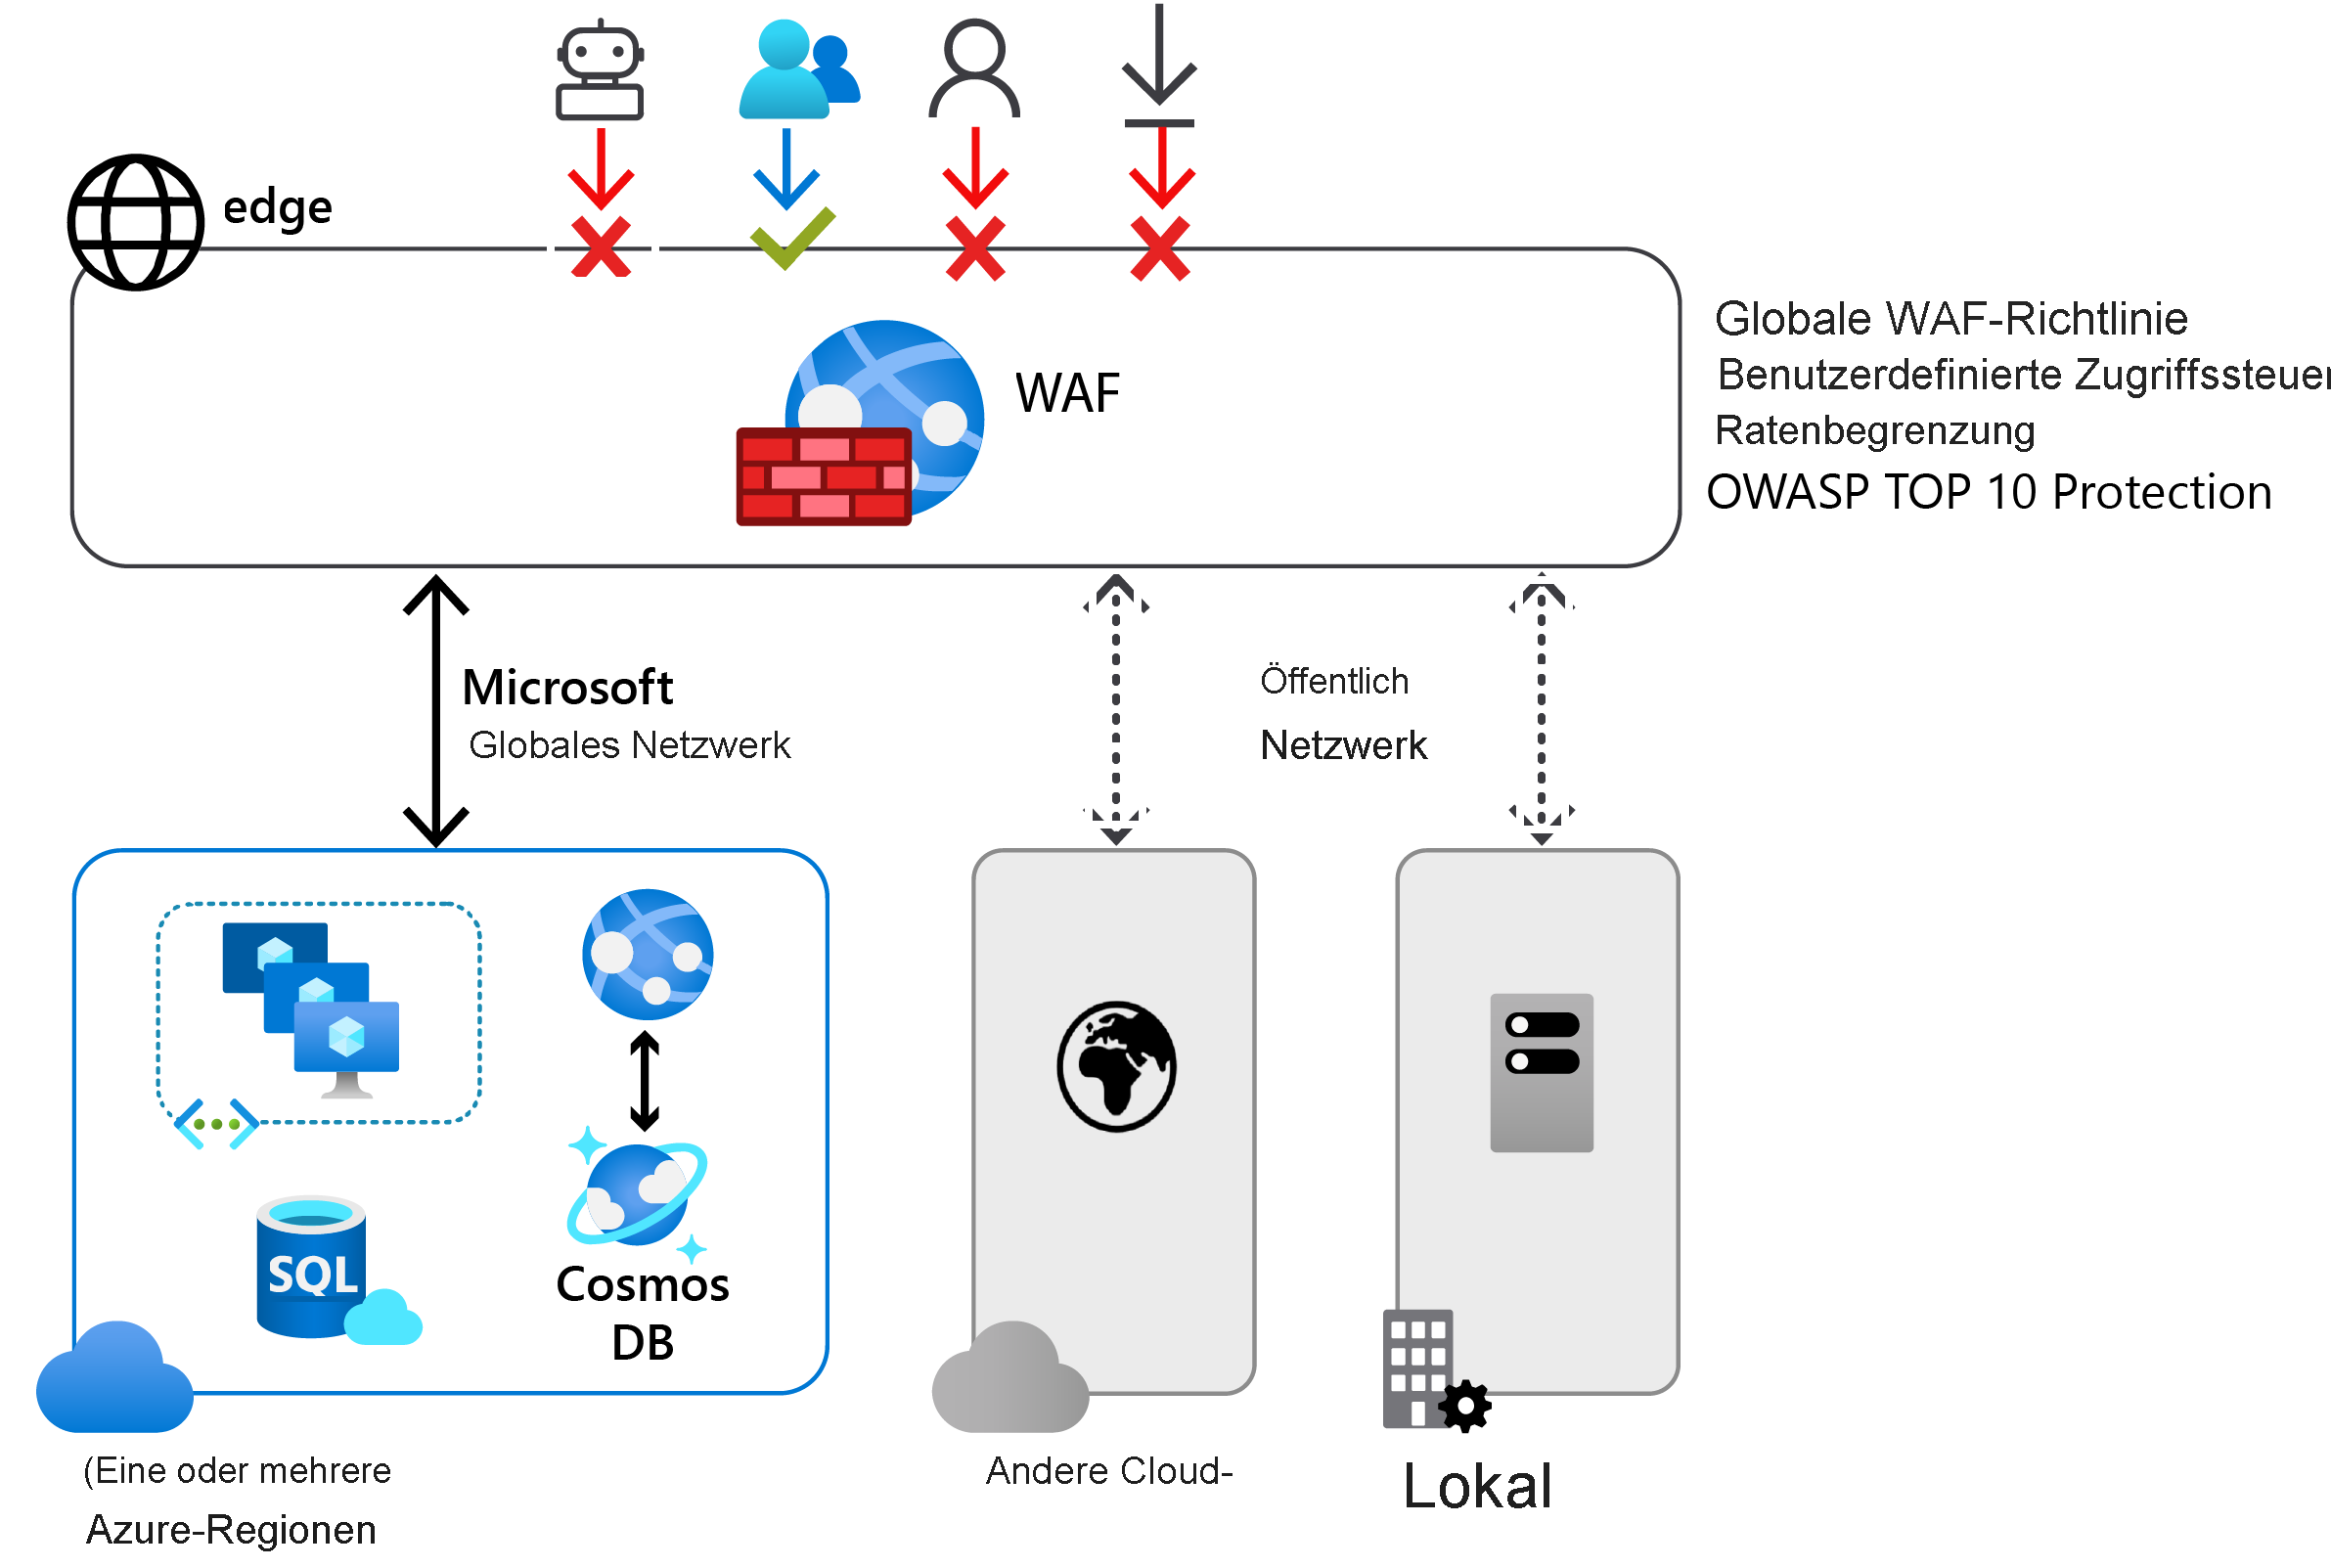 A typical Azure Web Application Firewall deployment. A Microsoft Global Network is comprised of Azure regions, and a Public Network includes an on-premises server and other cloud services. Separating these elements from the Azure resources is a web application firewall.